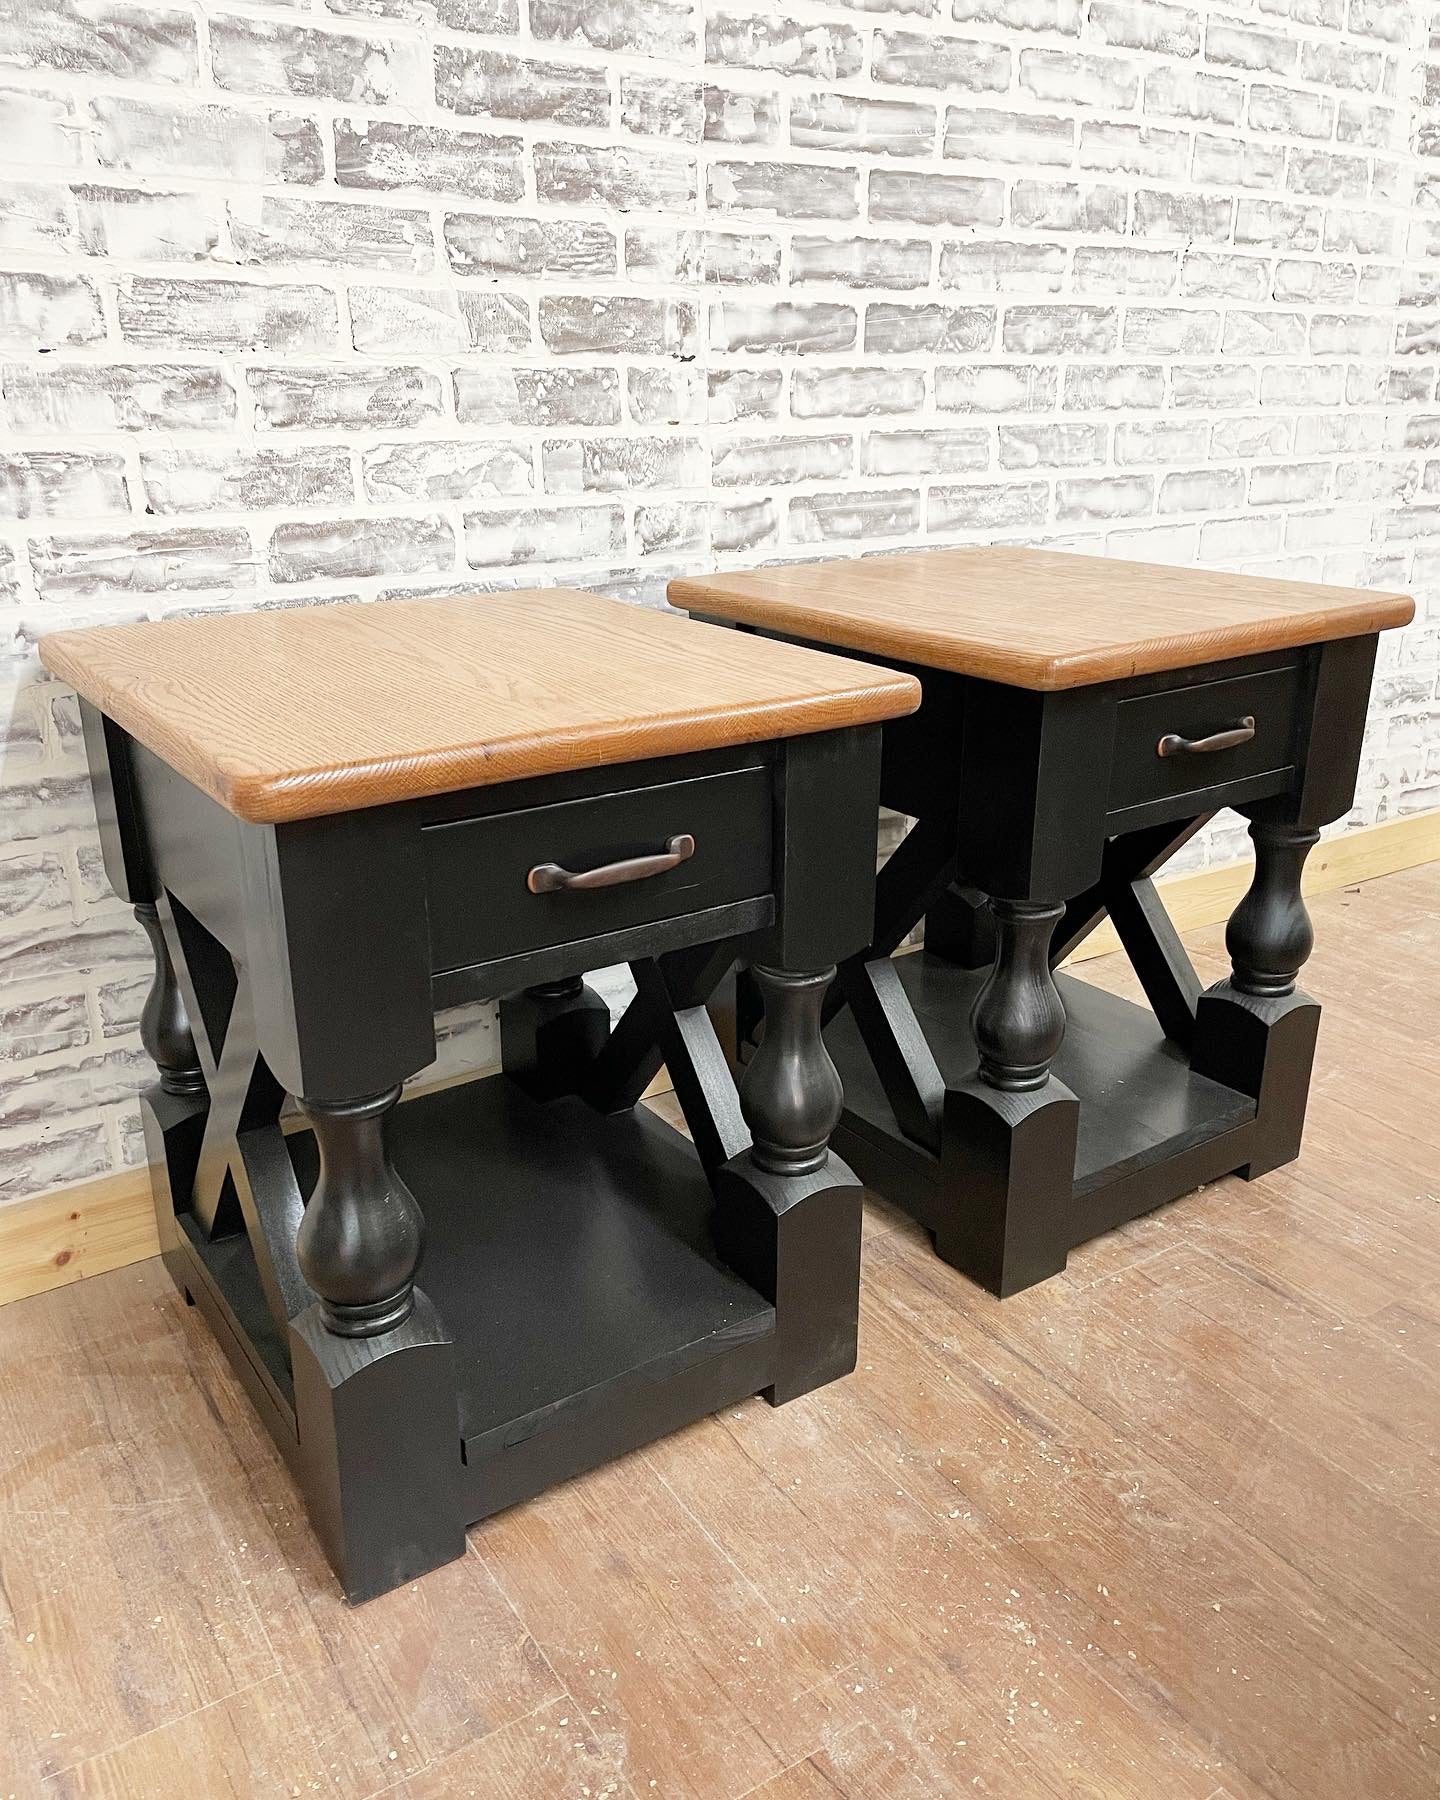 Pictured with two 24" T x 24" W x 24" D end tables with a Red Oak top with a Natural finish and painted black base.